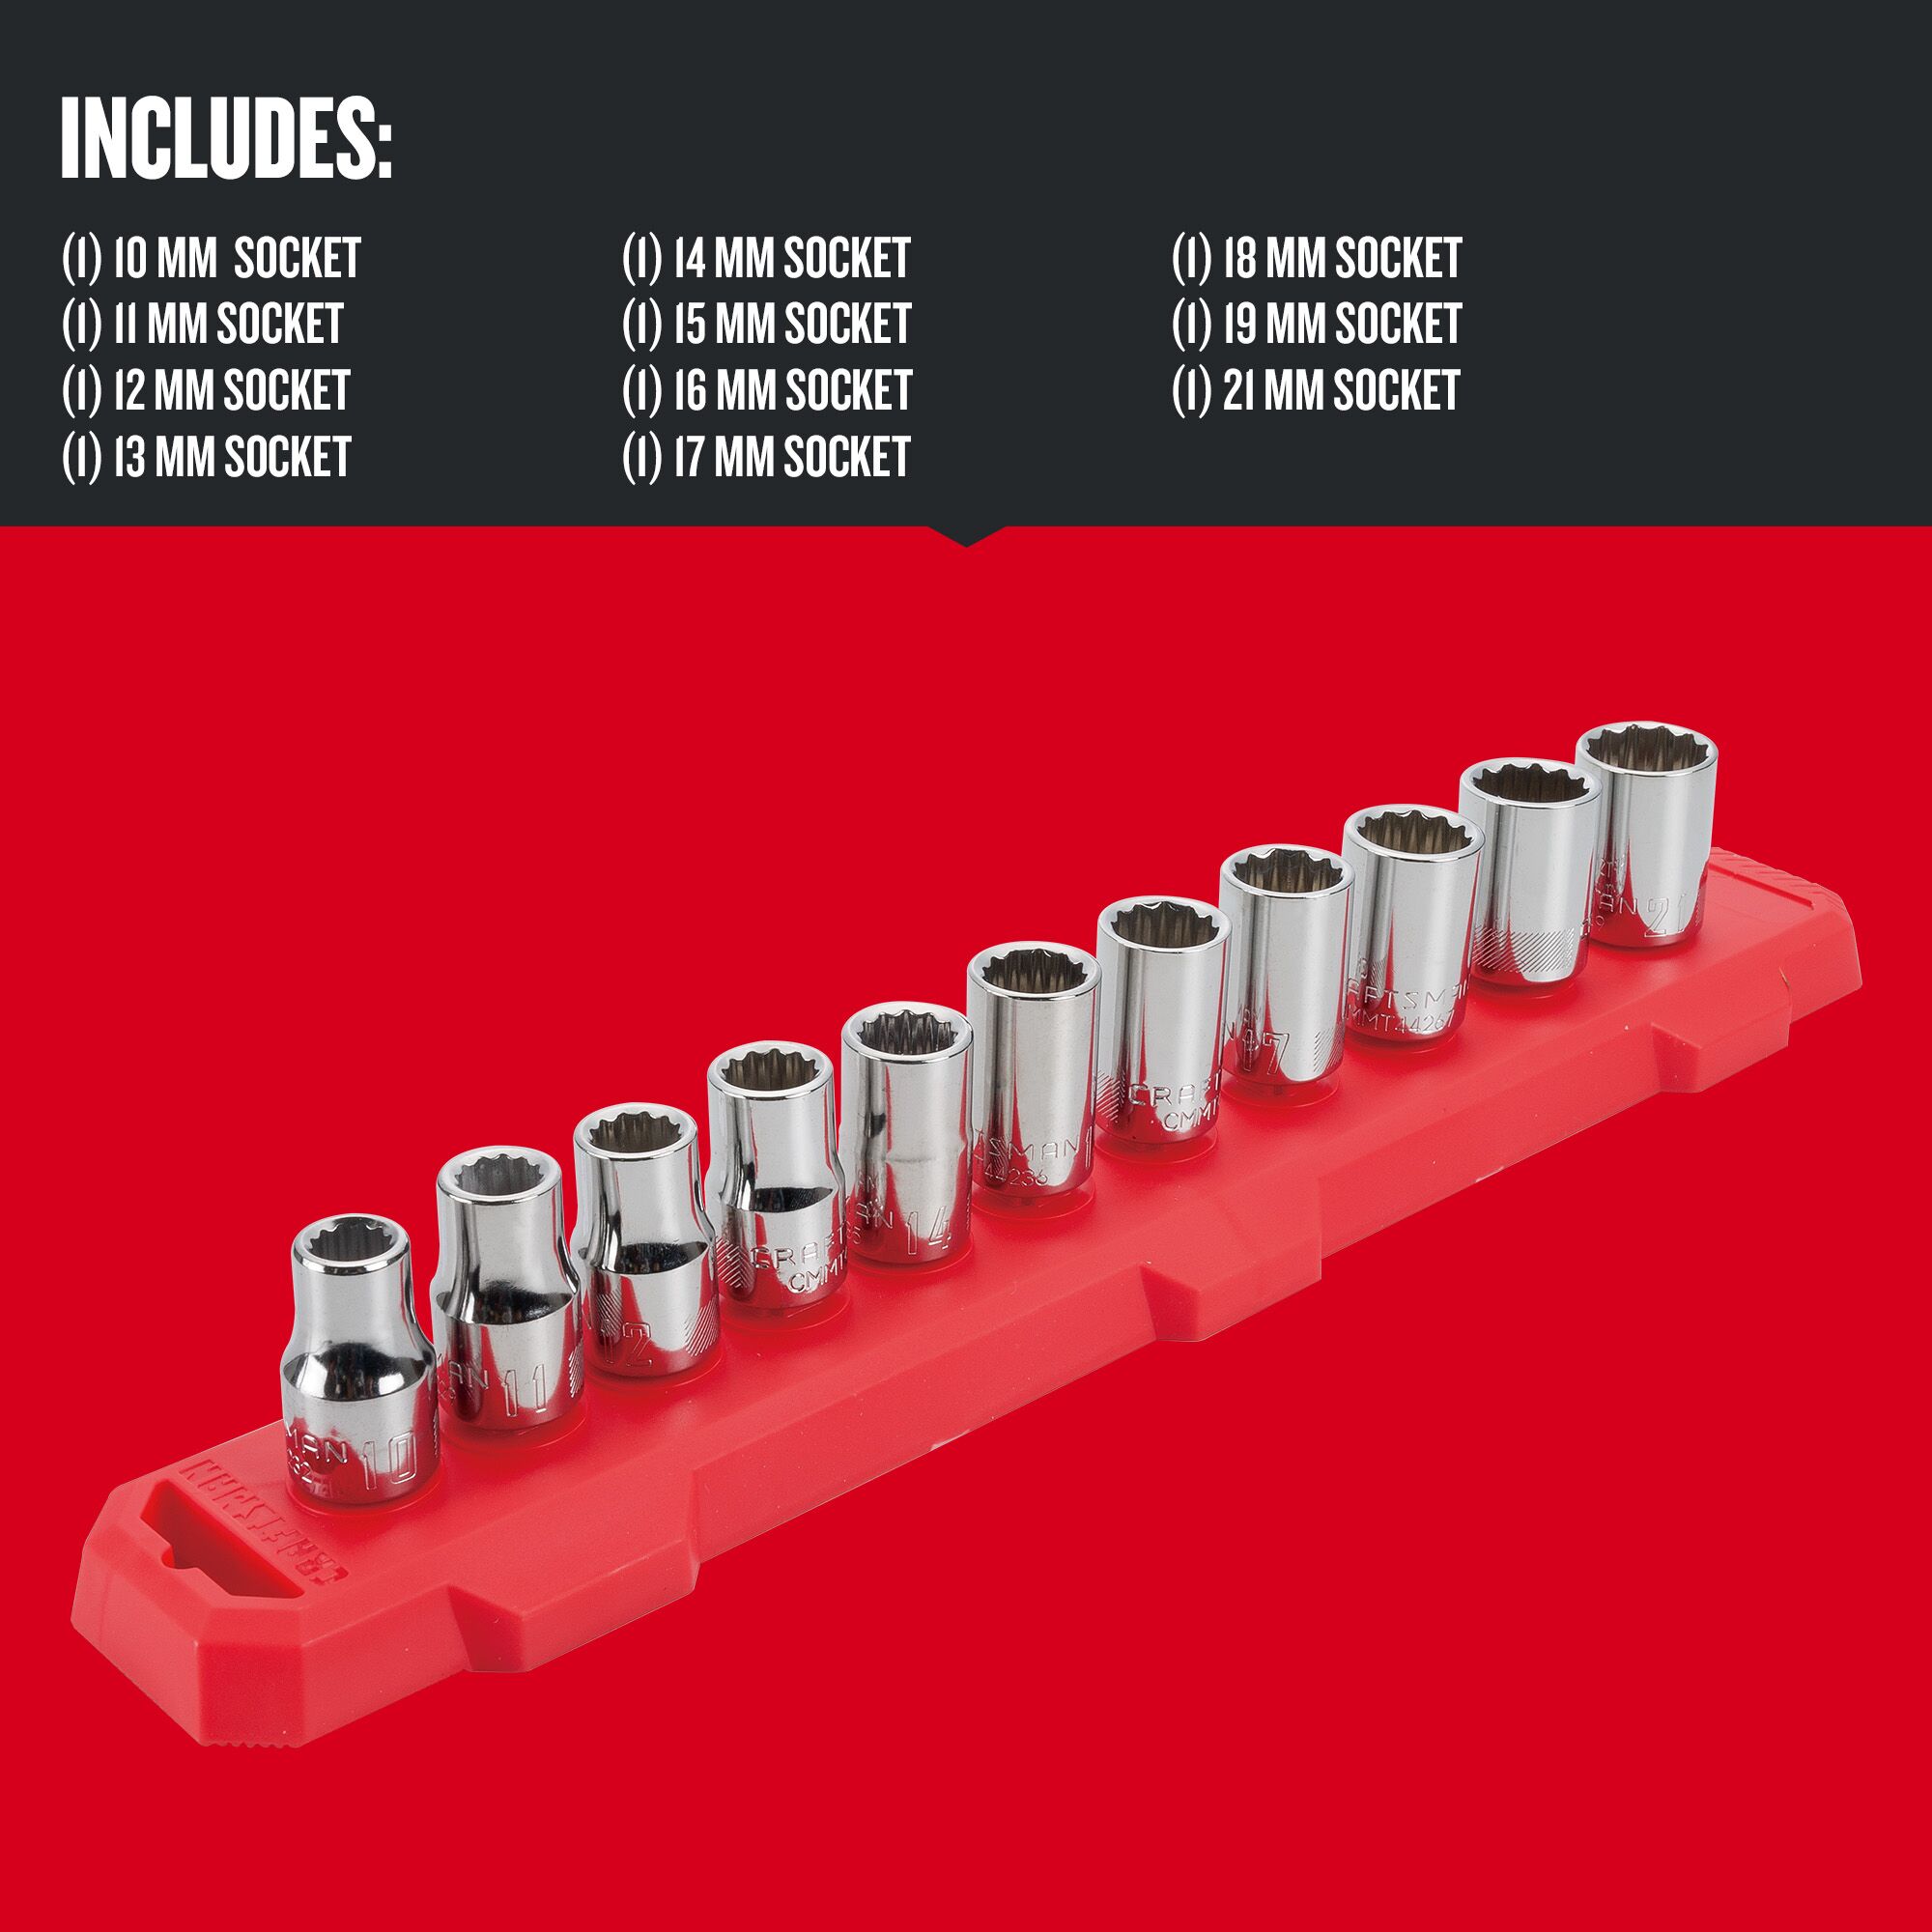 Graphic of CRAFTSMAN Sockets: Set highlighting product features